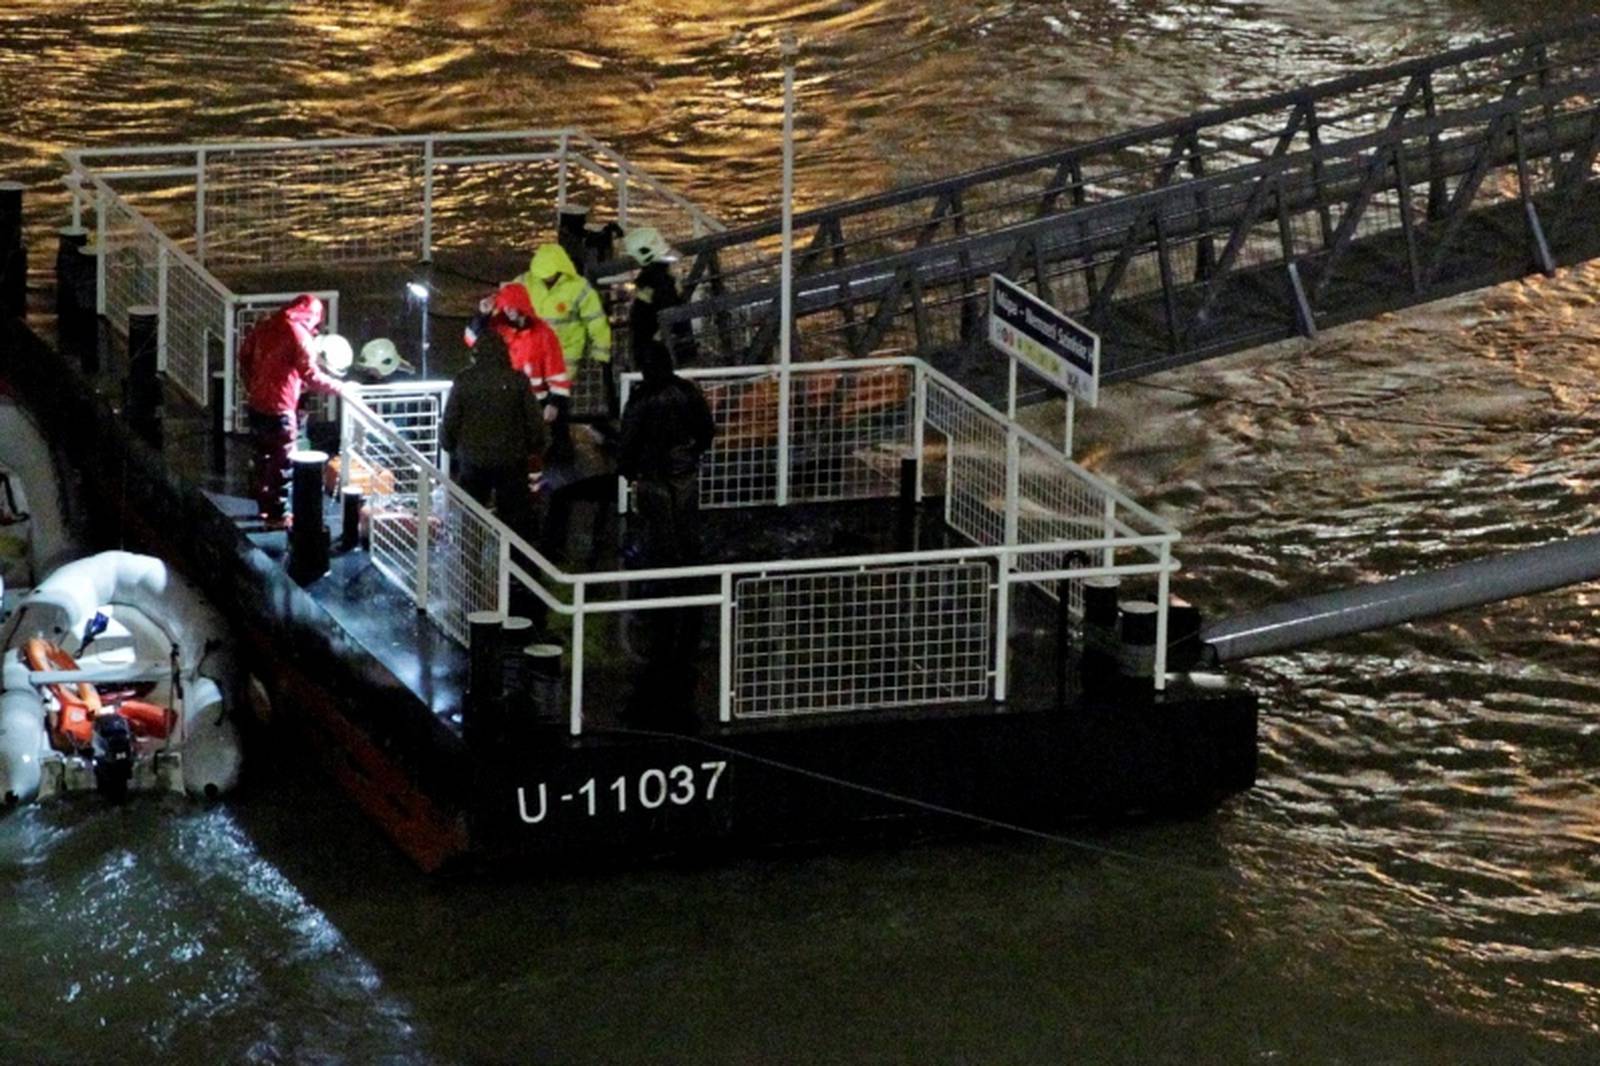 A rescue boat is seen on the Danube river after a tourist boat capsized in Budapest